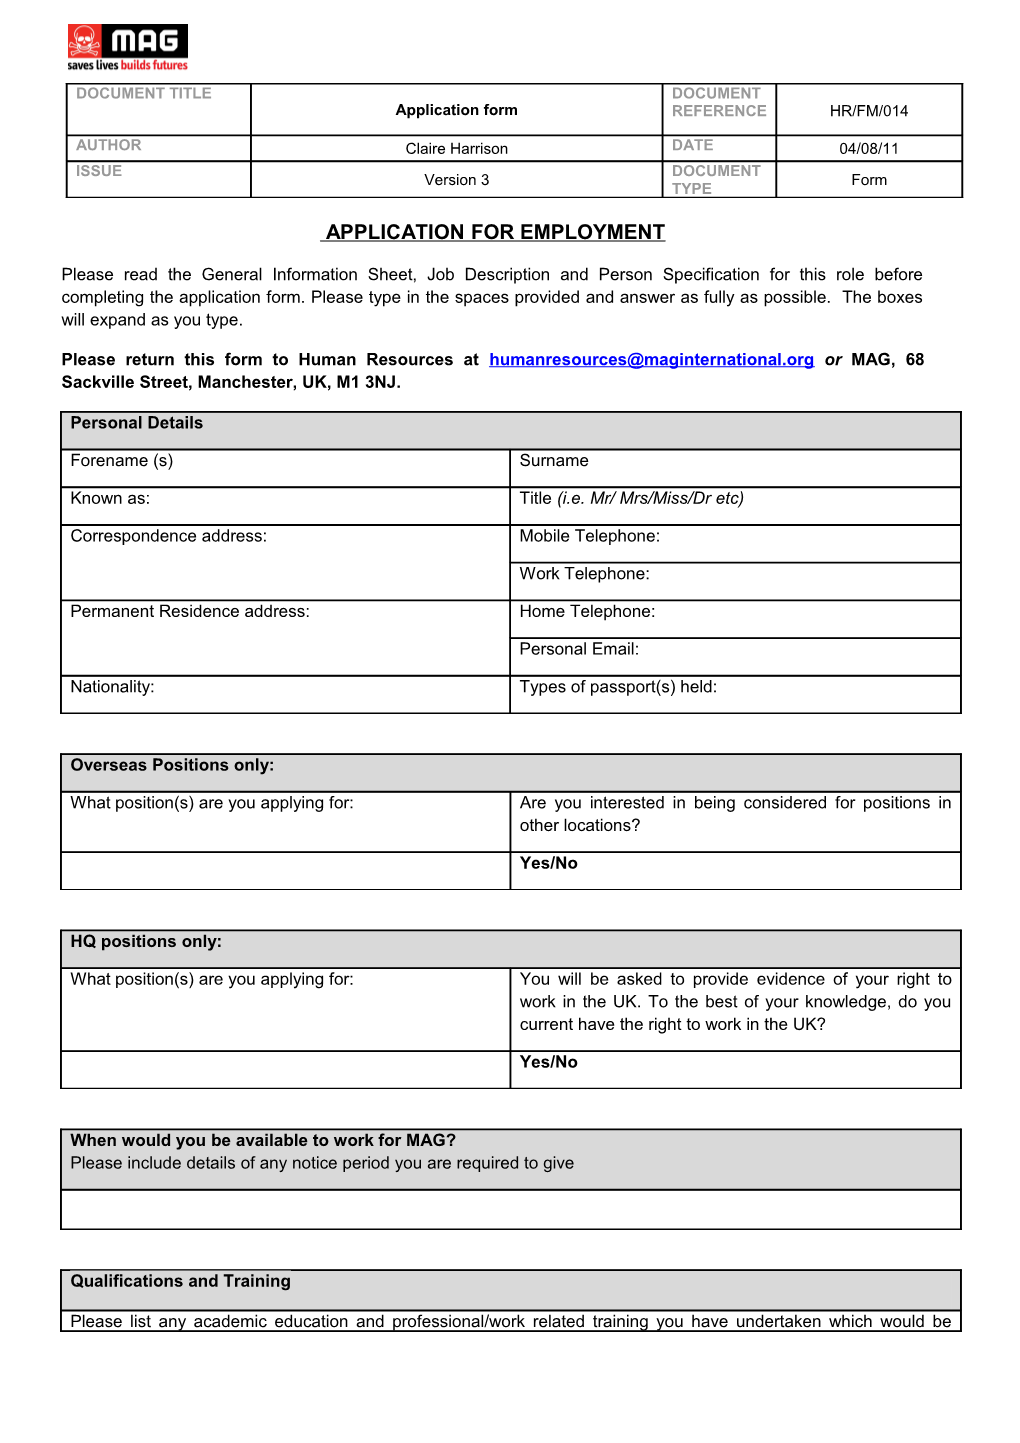 Please Return This Form to Human Resources at Or MAG, 68 Sackville Street, Manchester